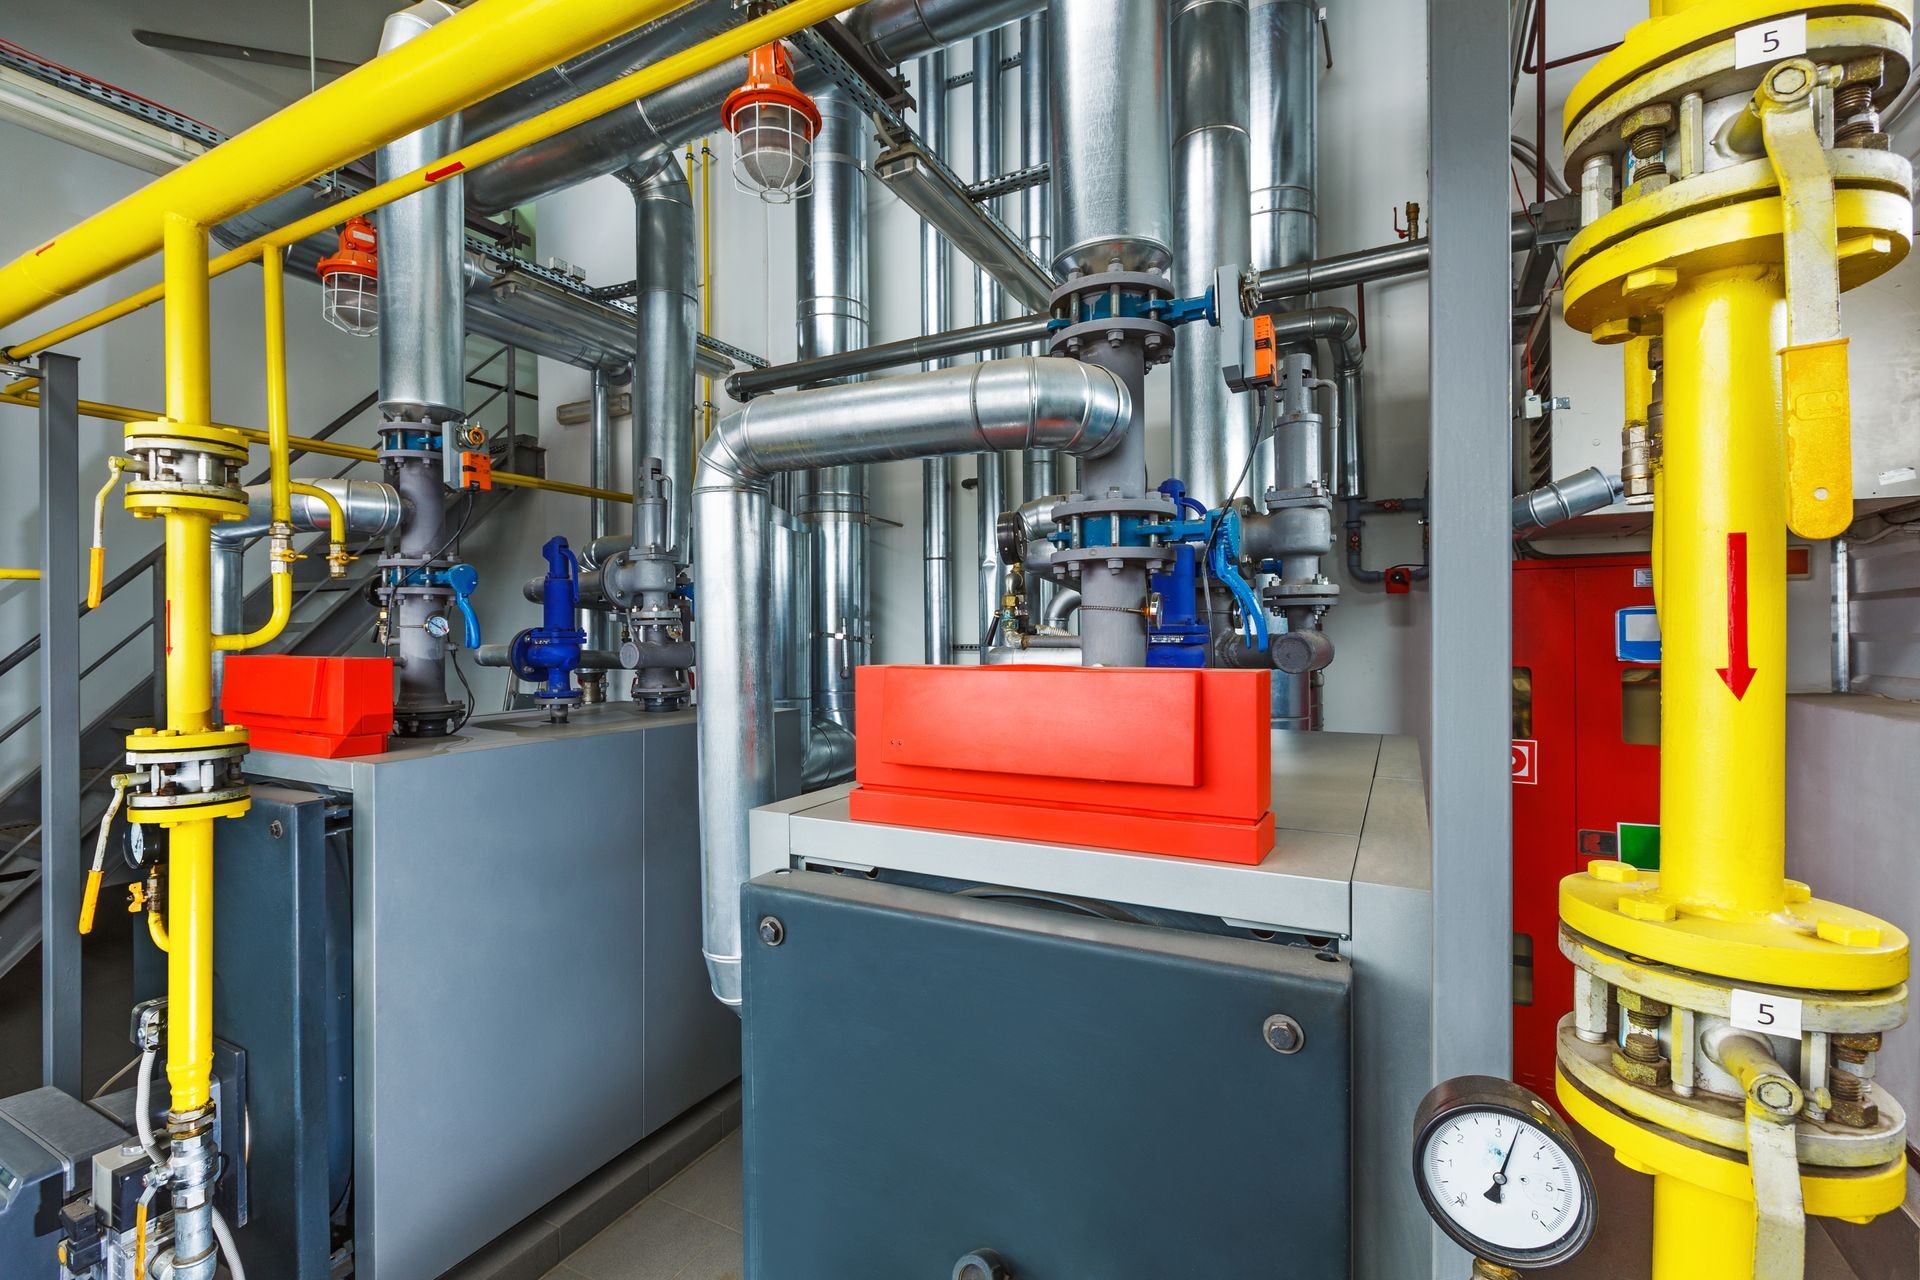 The interior of an industrial boiler house with a multitude of pipes, boilers and sensors.